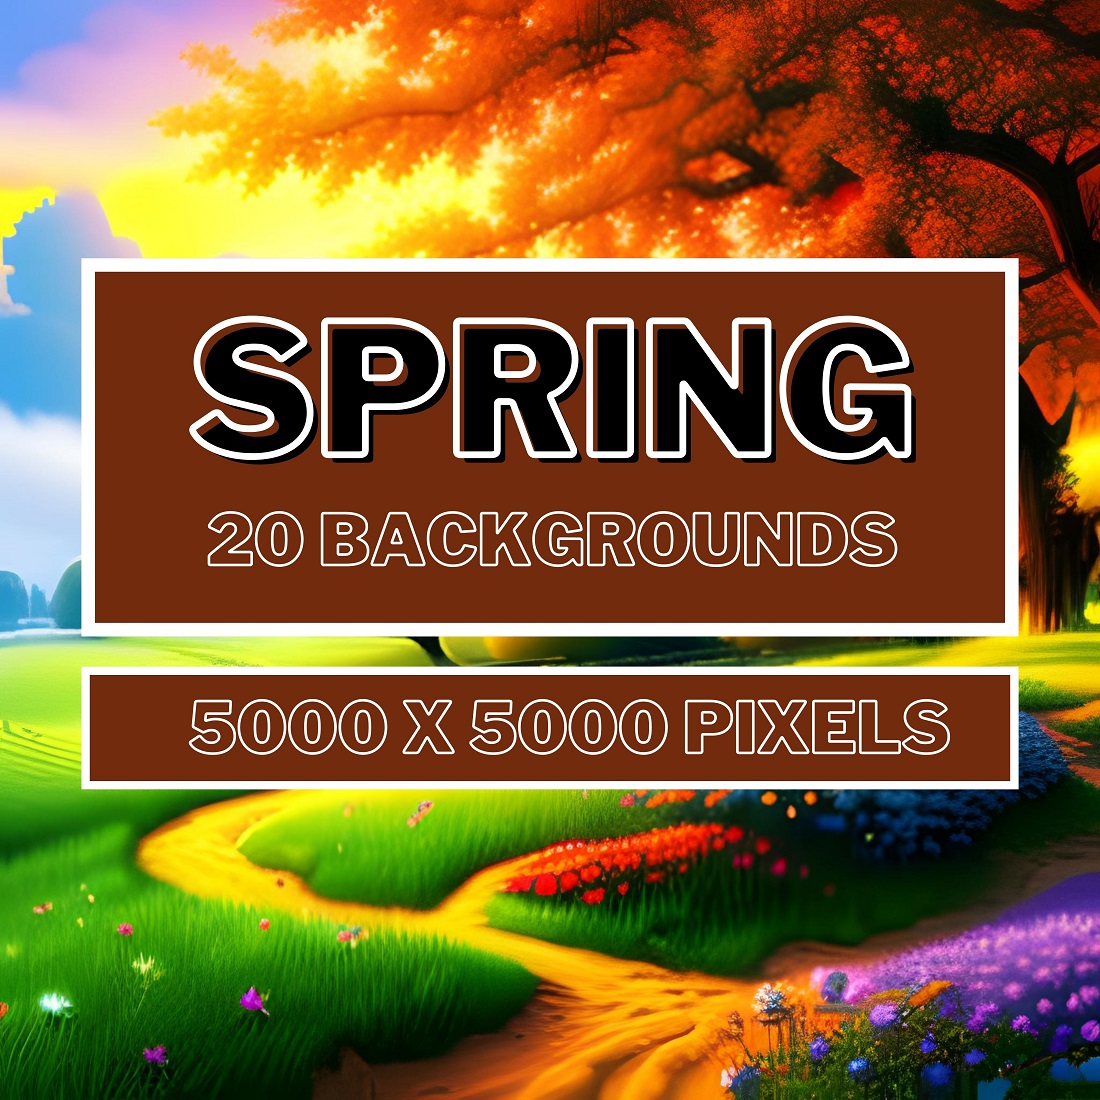 spring bundle with high quality 20 backgrounds cover image.